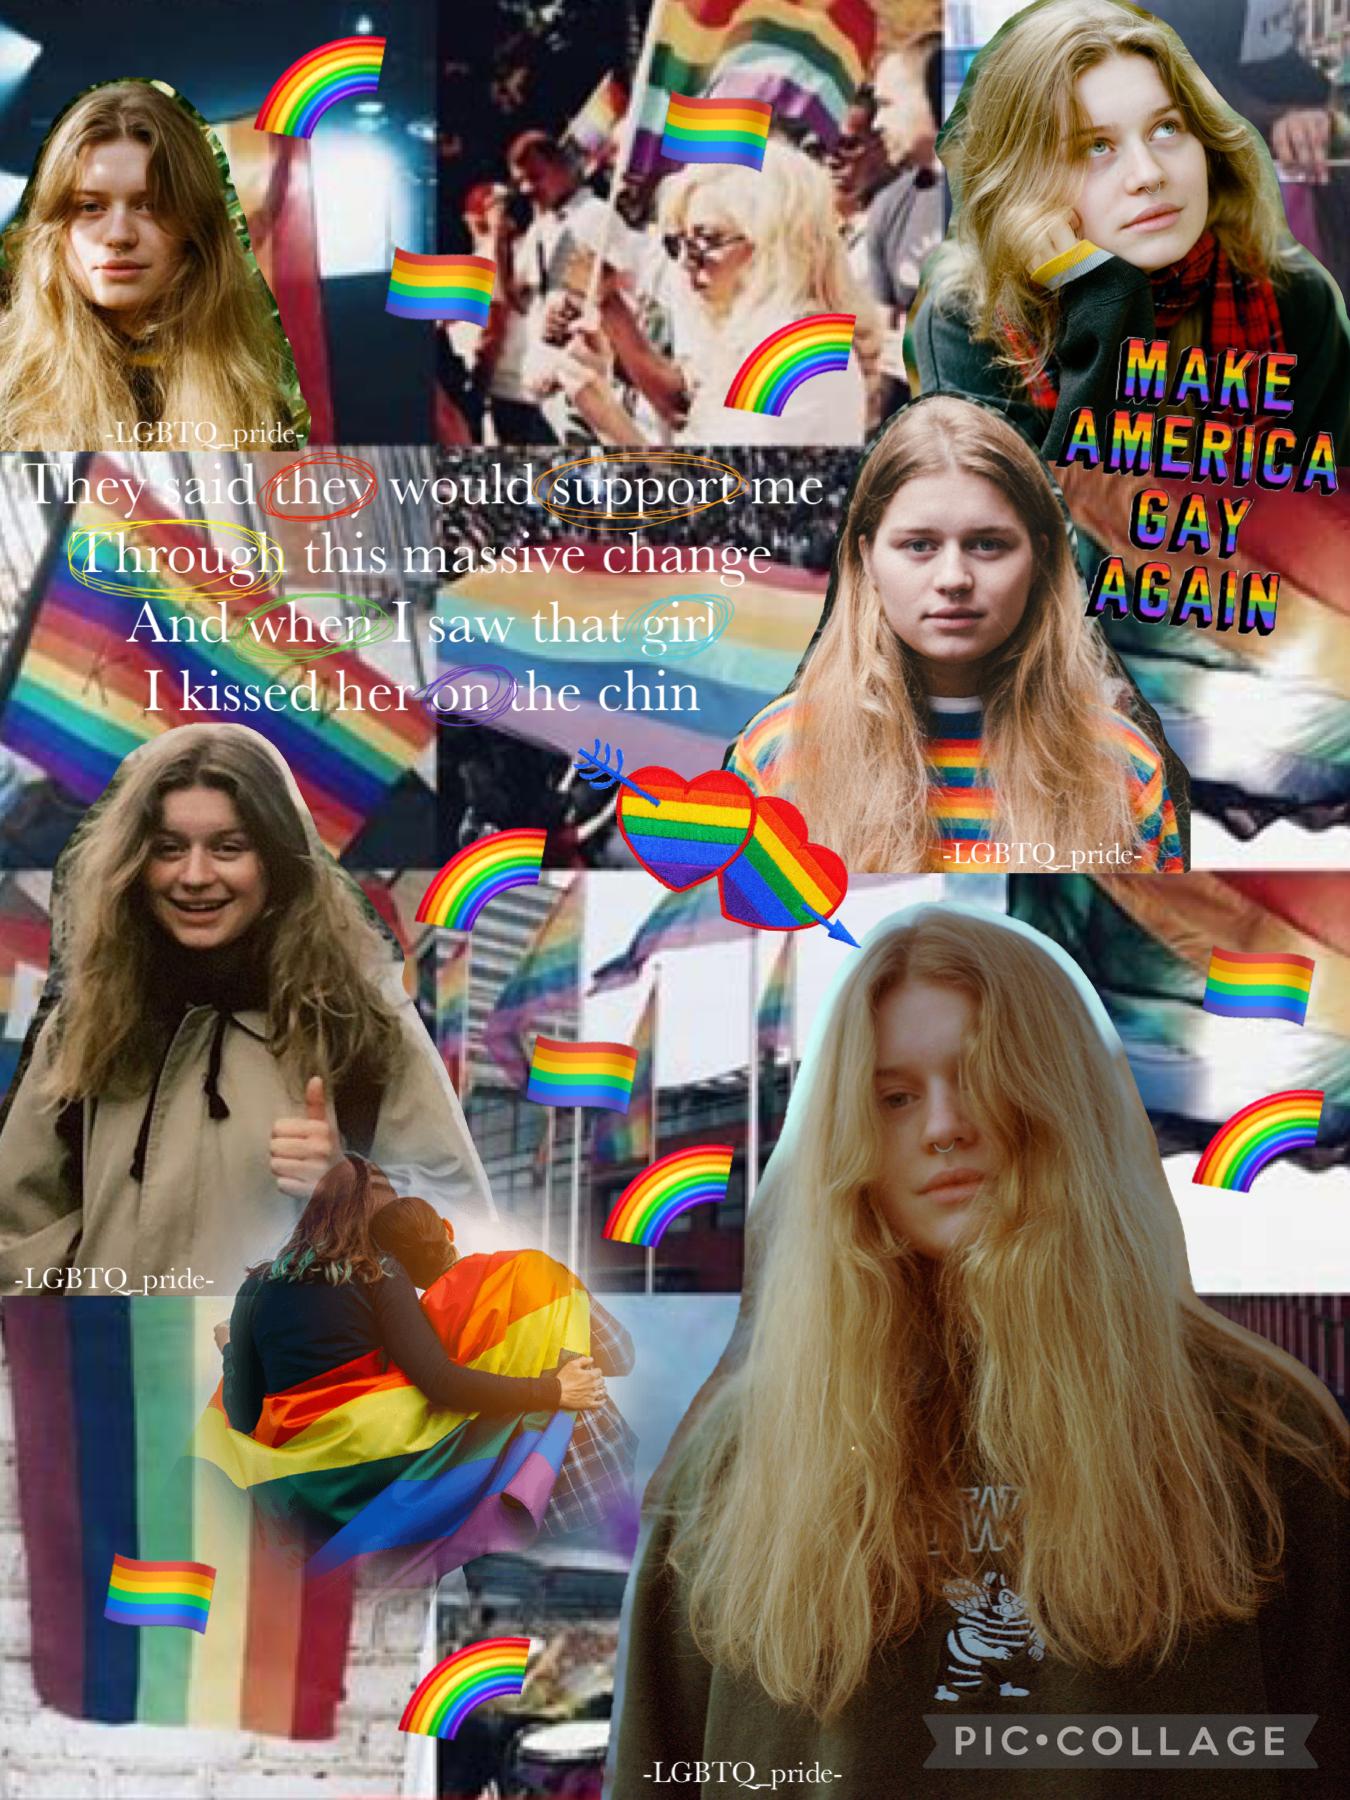 🏳️‍🌈TAP🏳️‍🌈
Girl in red collage! How is this? I coulda dod a little better but I’m not really good at making collages! 🌈HAPPY PRIDE MONTH🌈 (5/2/21)